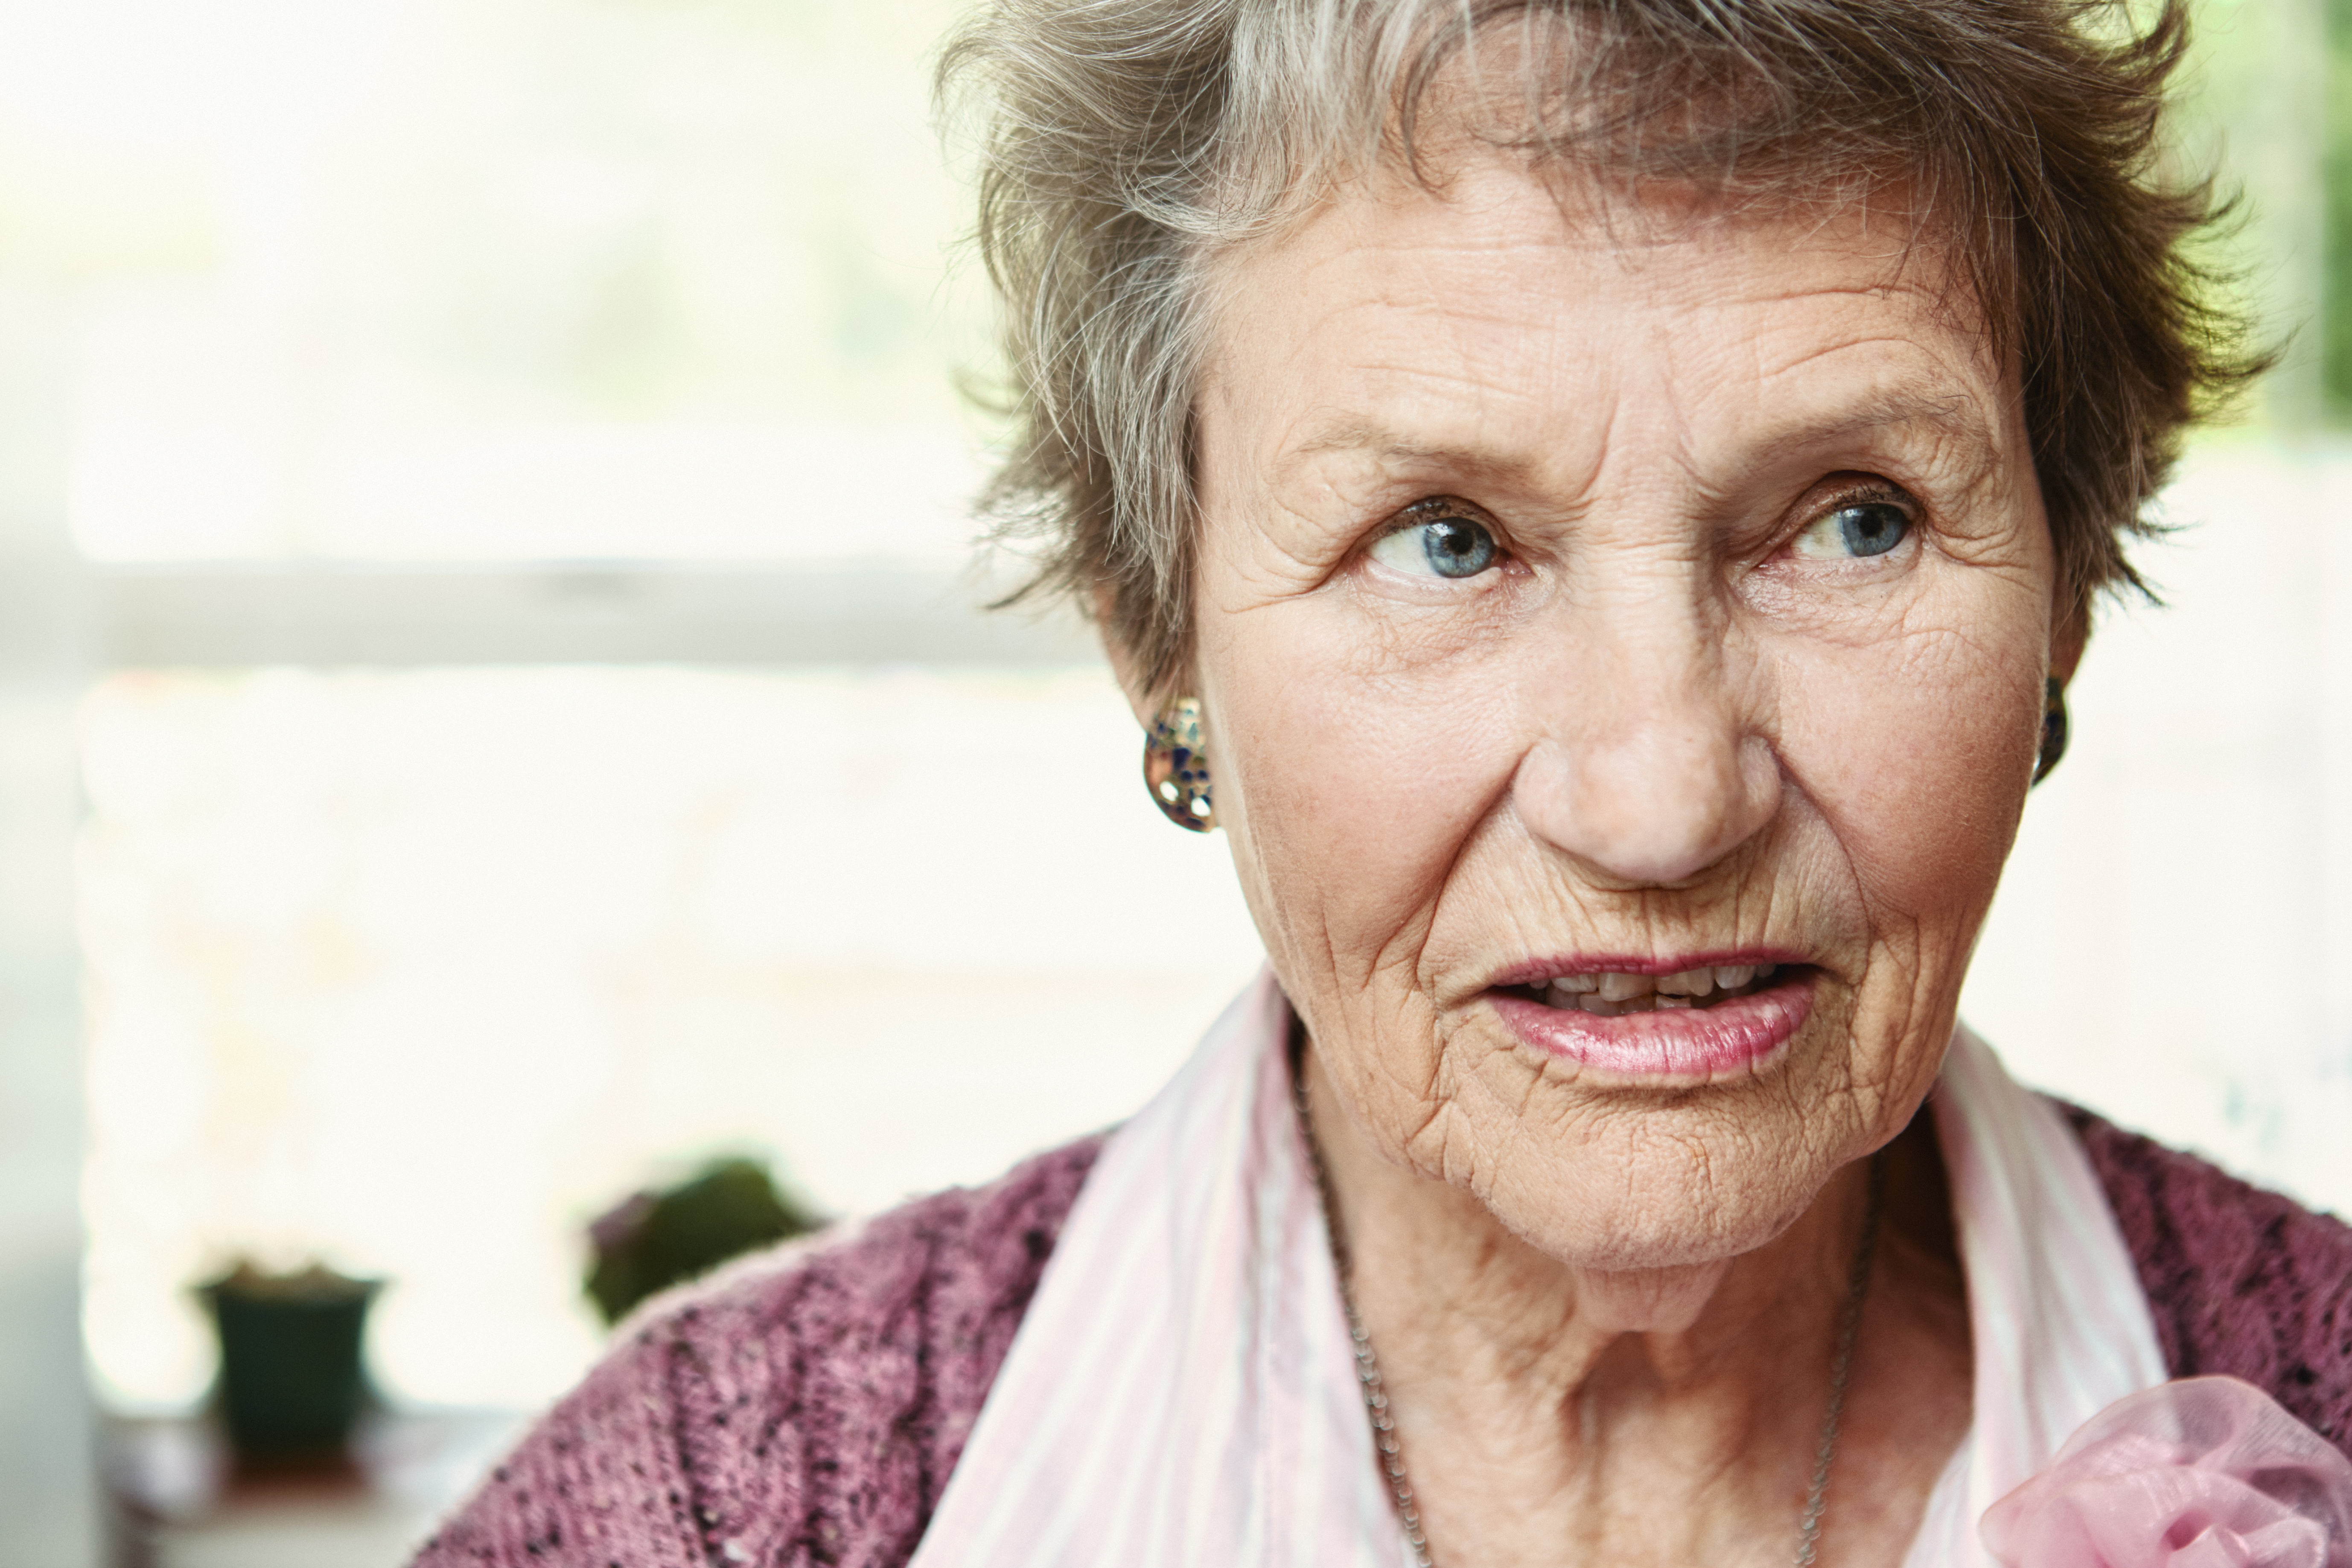 Senior woman in her 80s looks away, seeming confused and anxious | Source: Getty Images